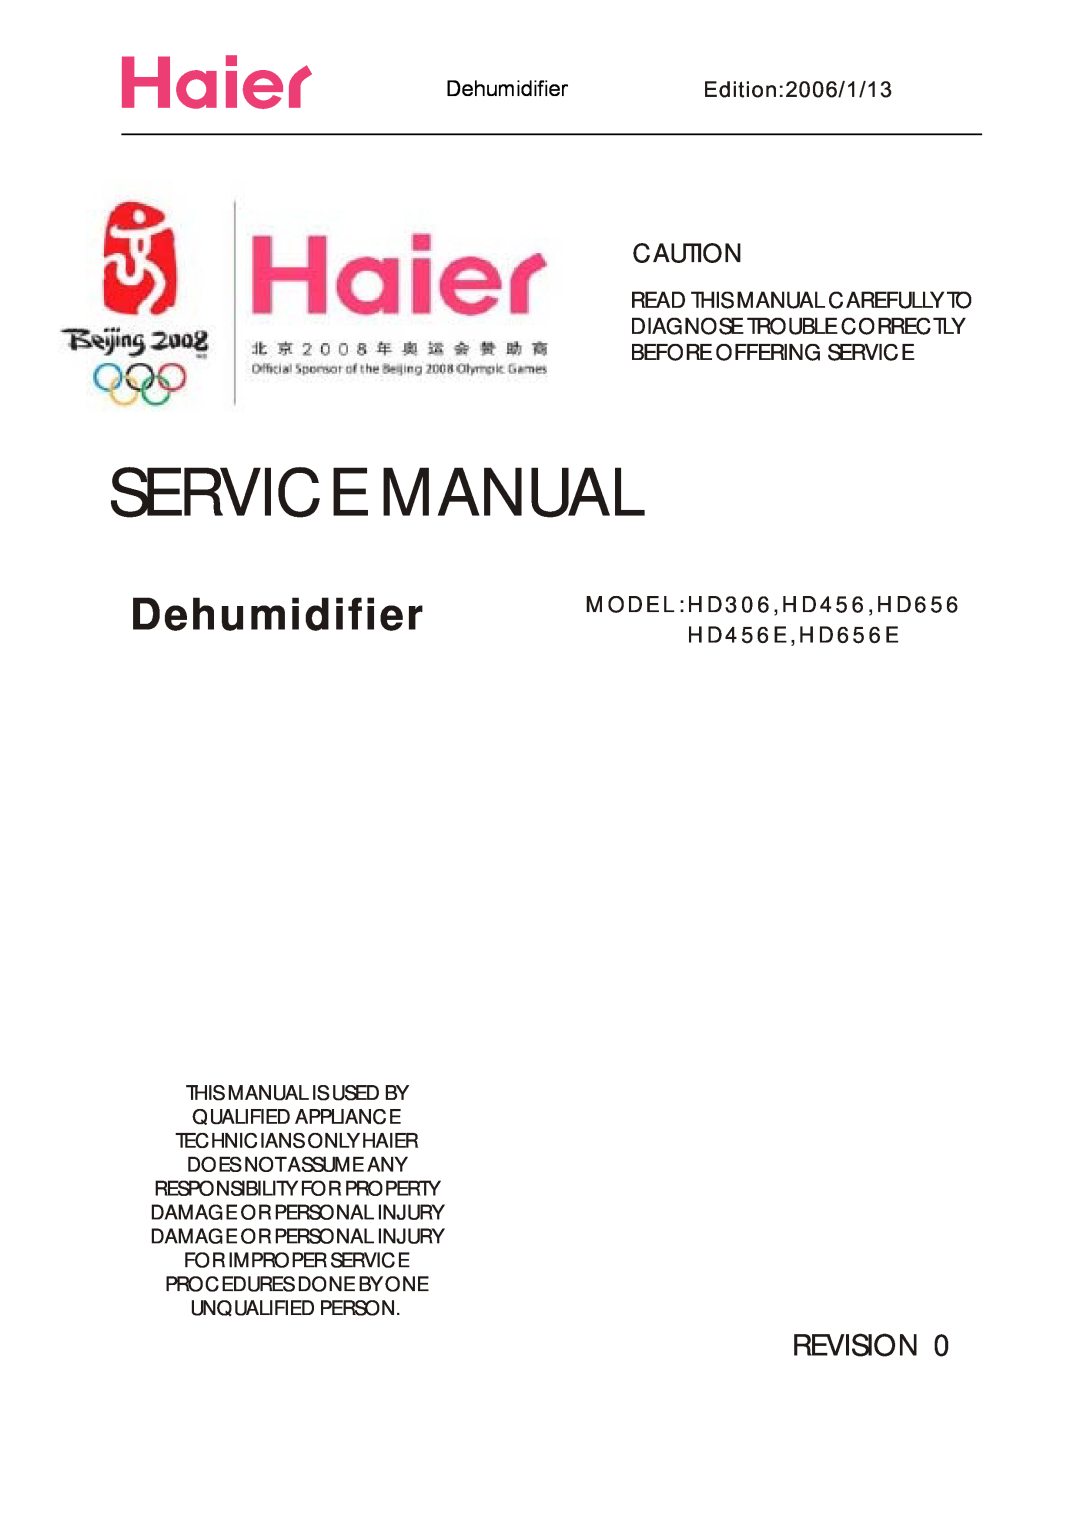 Haier HD656, HD456E service manual DehumidifierEdition 2006/1/13, Read This Manual Carefully To, Before Offering Service 